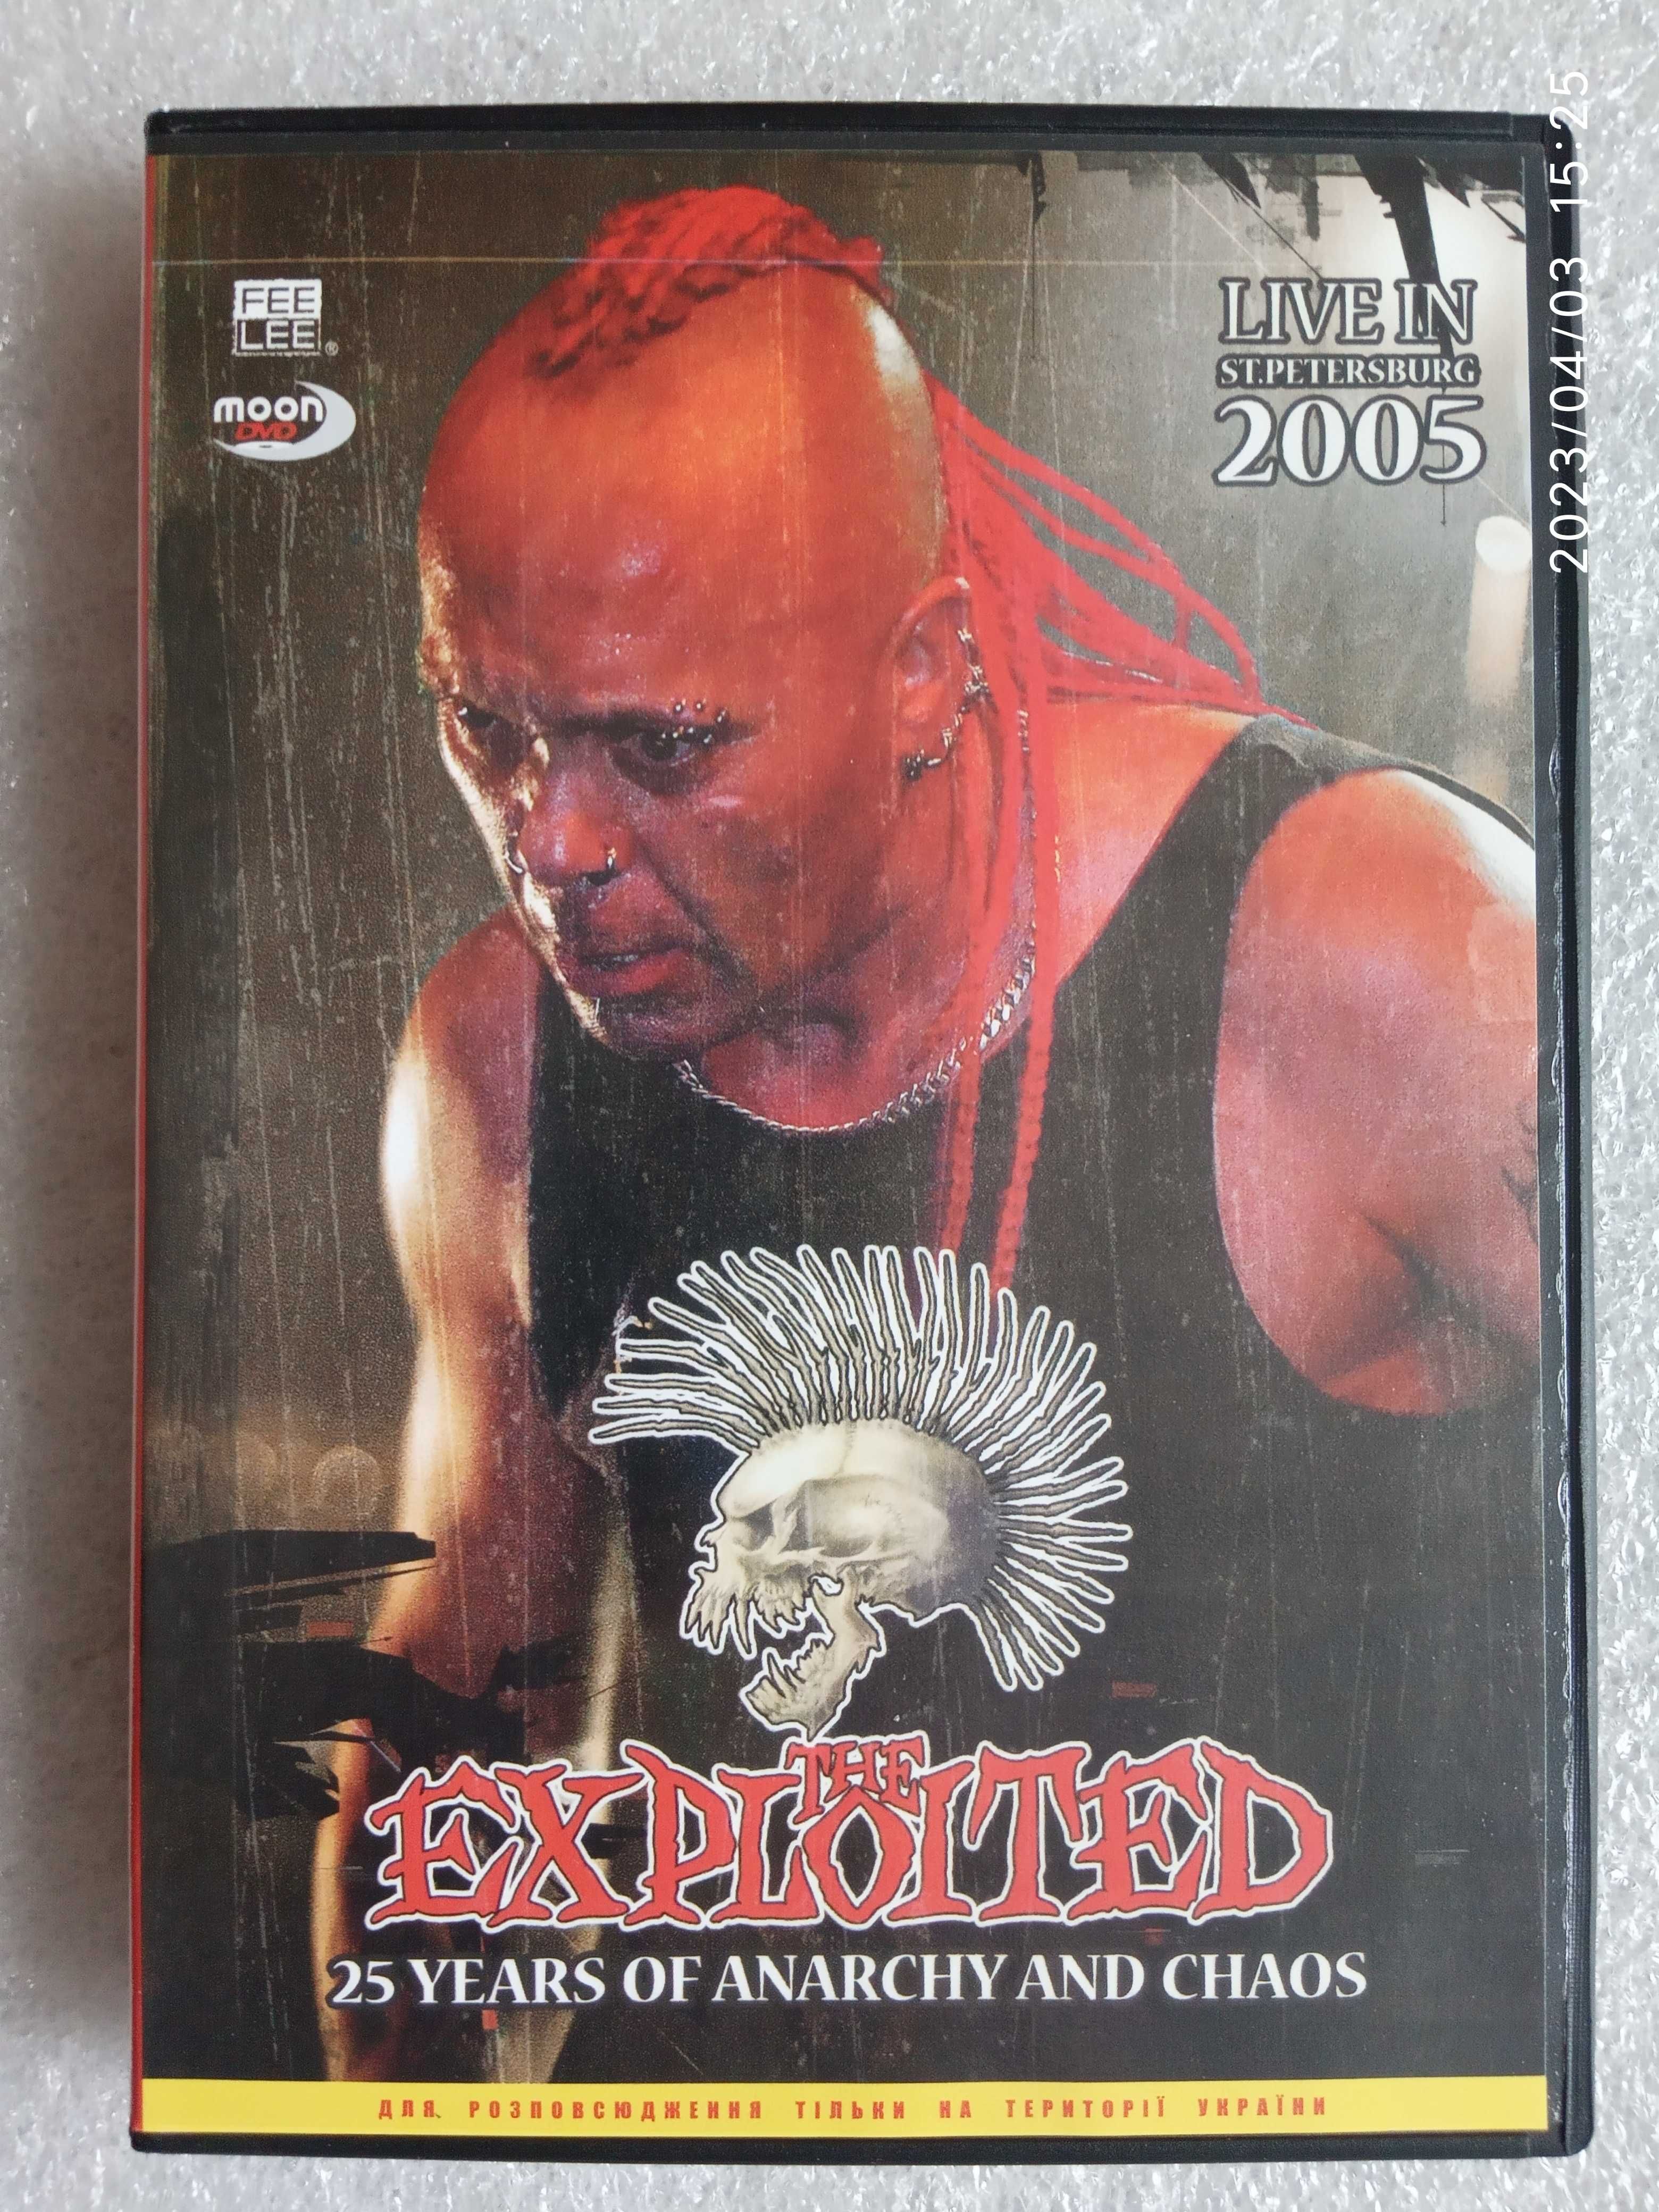 The Exploited "Live In St.Peterburg 2005" DVD